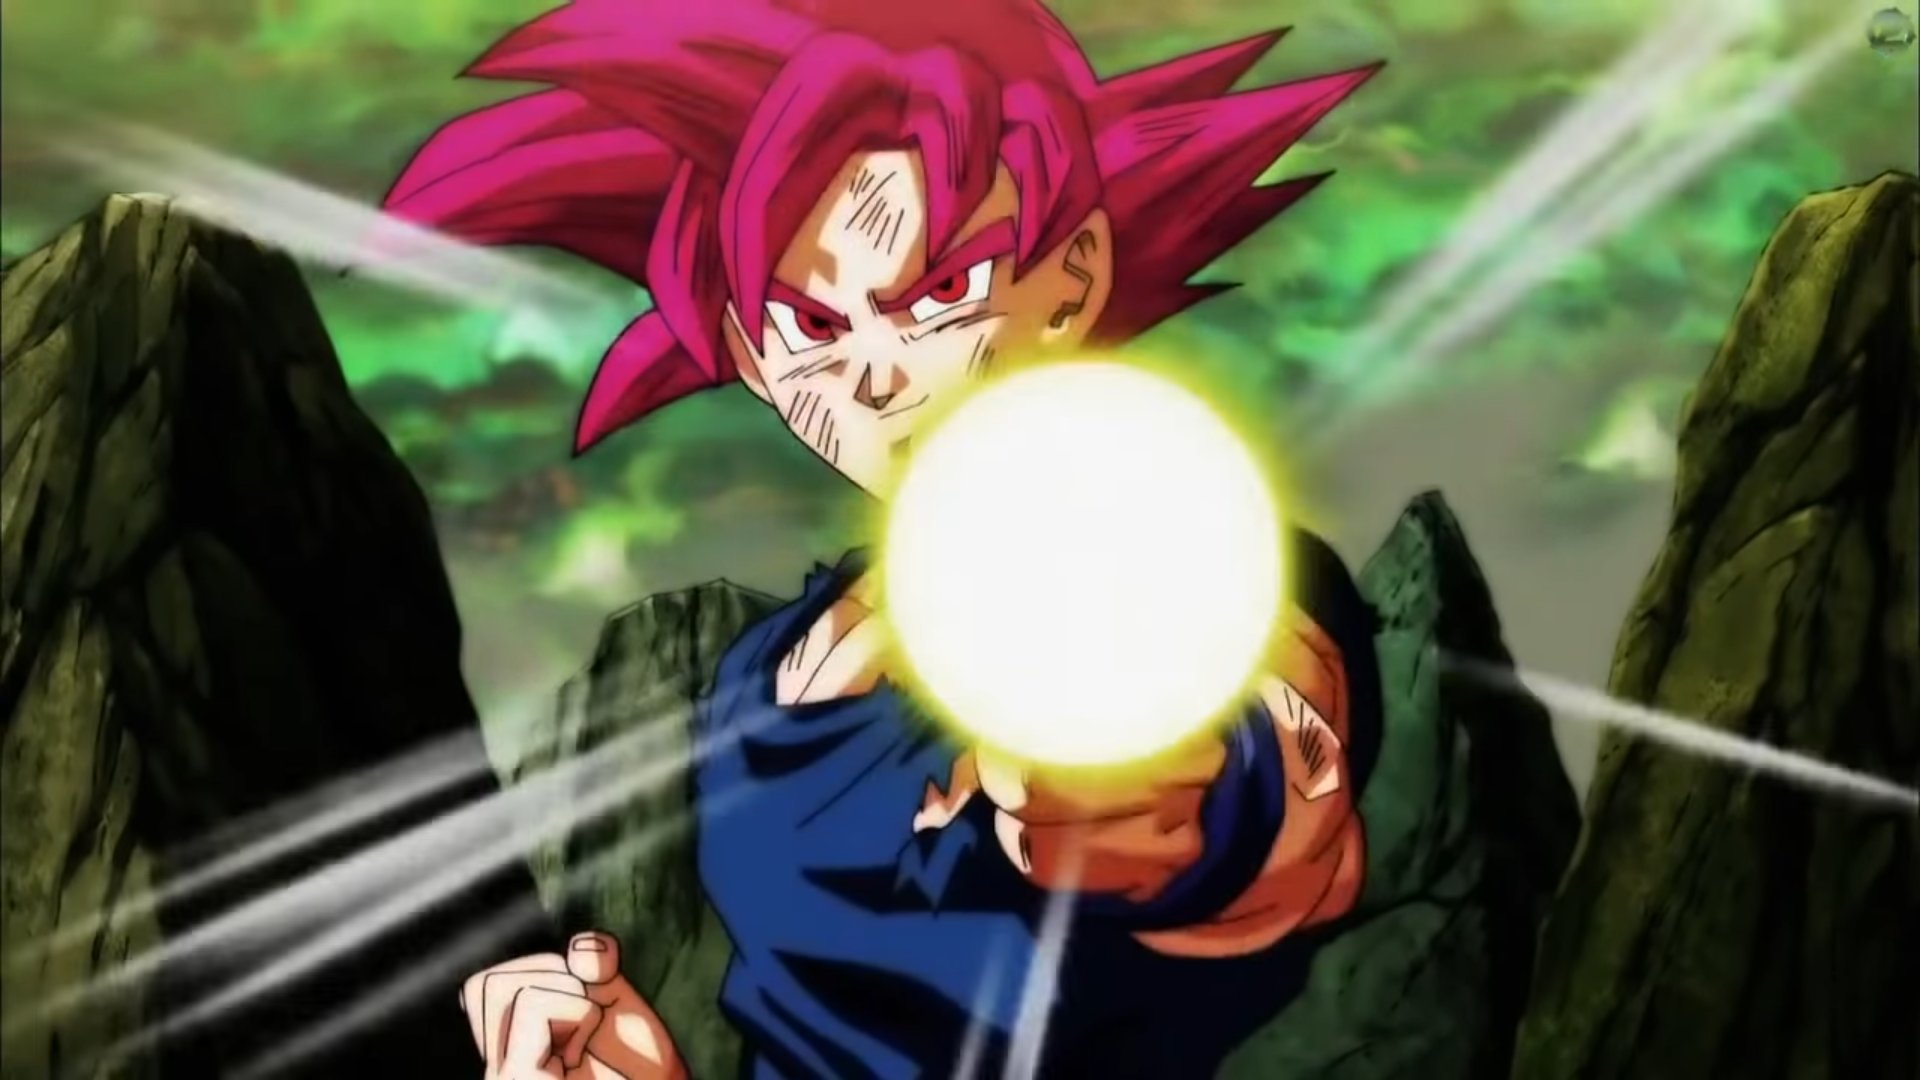 Sloさんはtwitterを使っています I Really Want Super Saiyan God Goku To Get An Update In Xenoverse 2 He Should Get These Updated Skills God Bind Super Evasive God Shot Super Gravity Bash